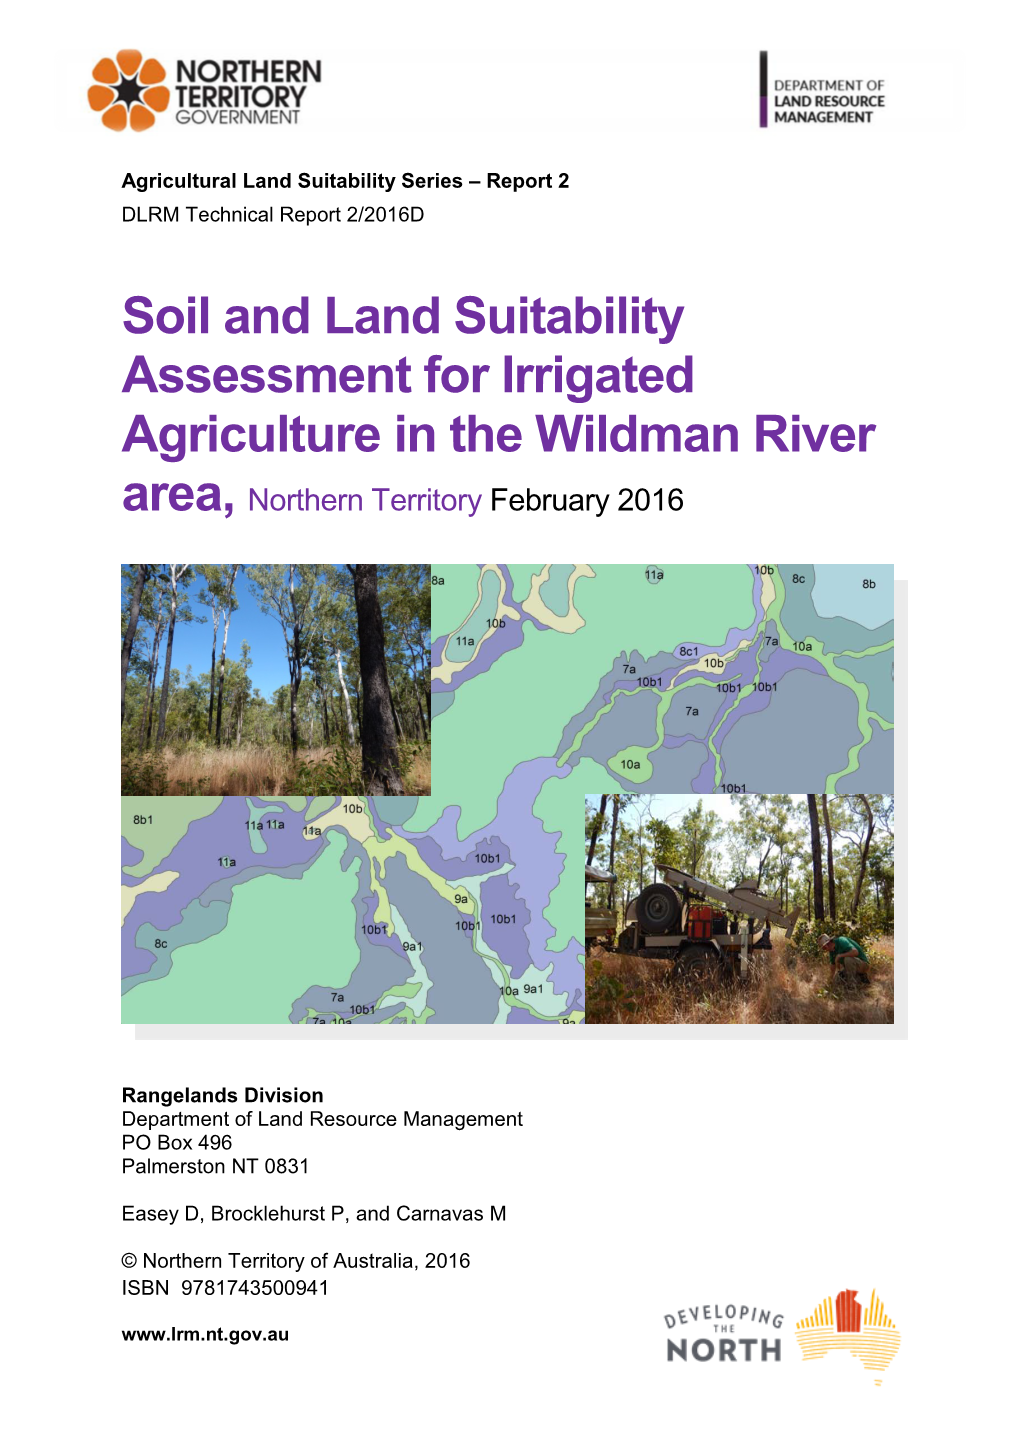 Soil and Land Suitability Assessment for Irrigated Agriculture in the Wildman River Area, Northern Territory February 2016